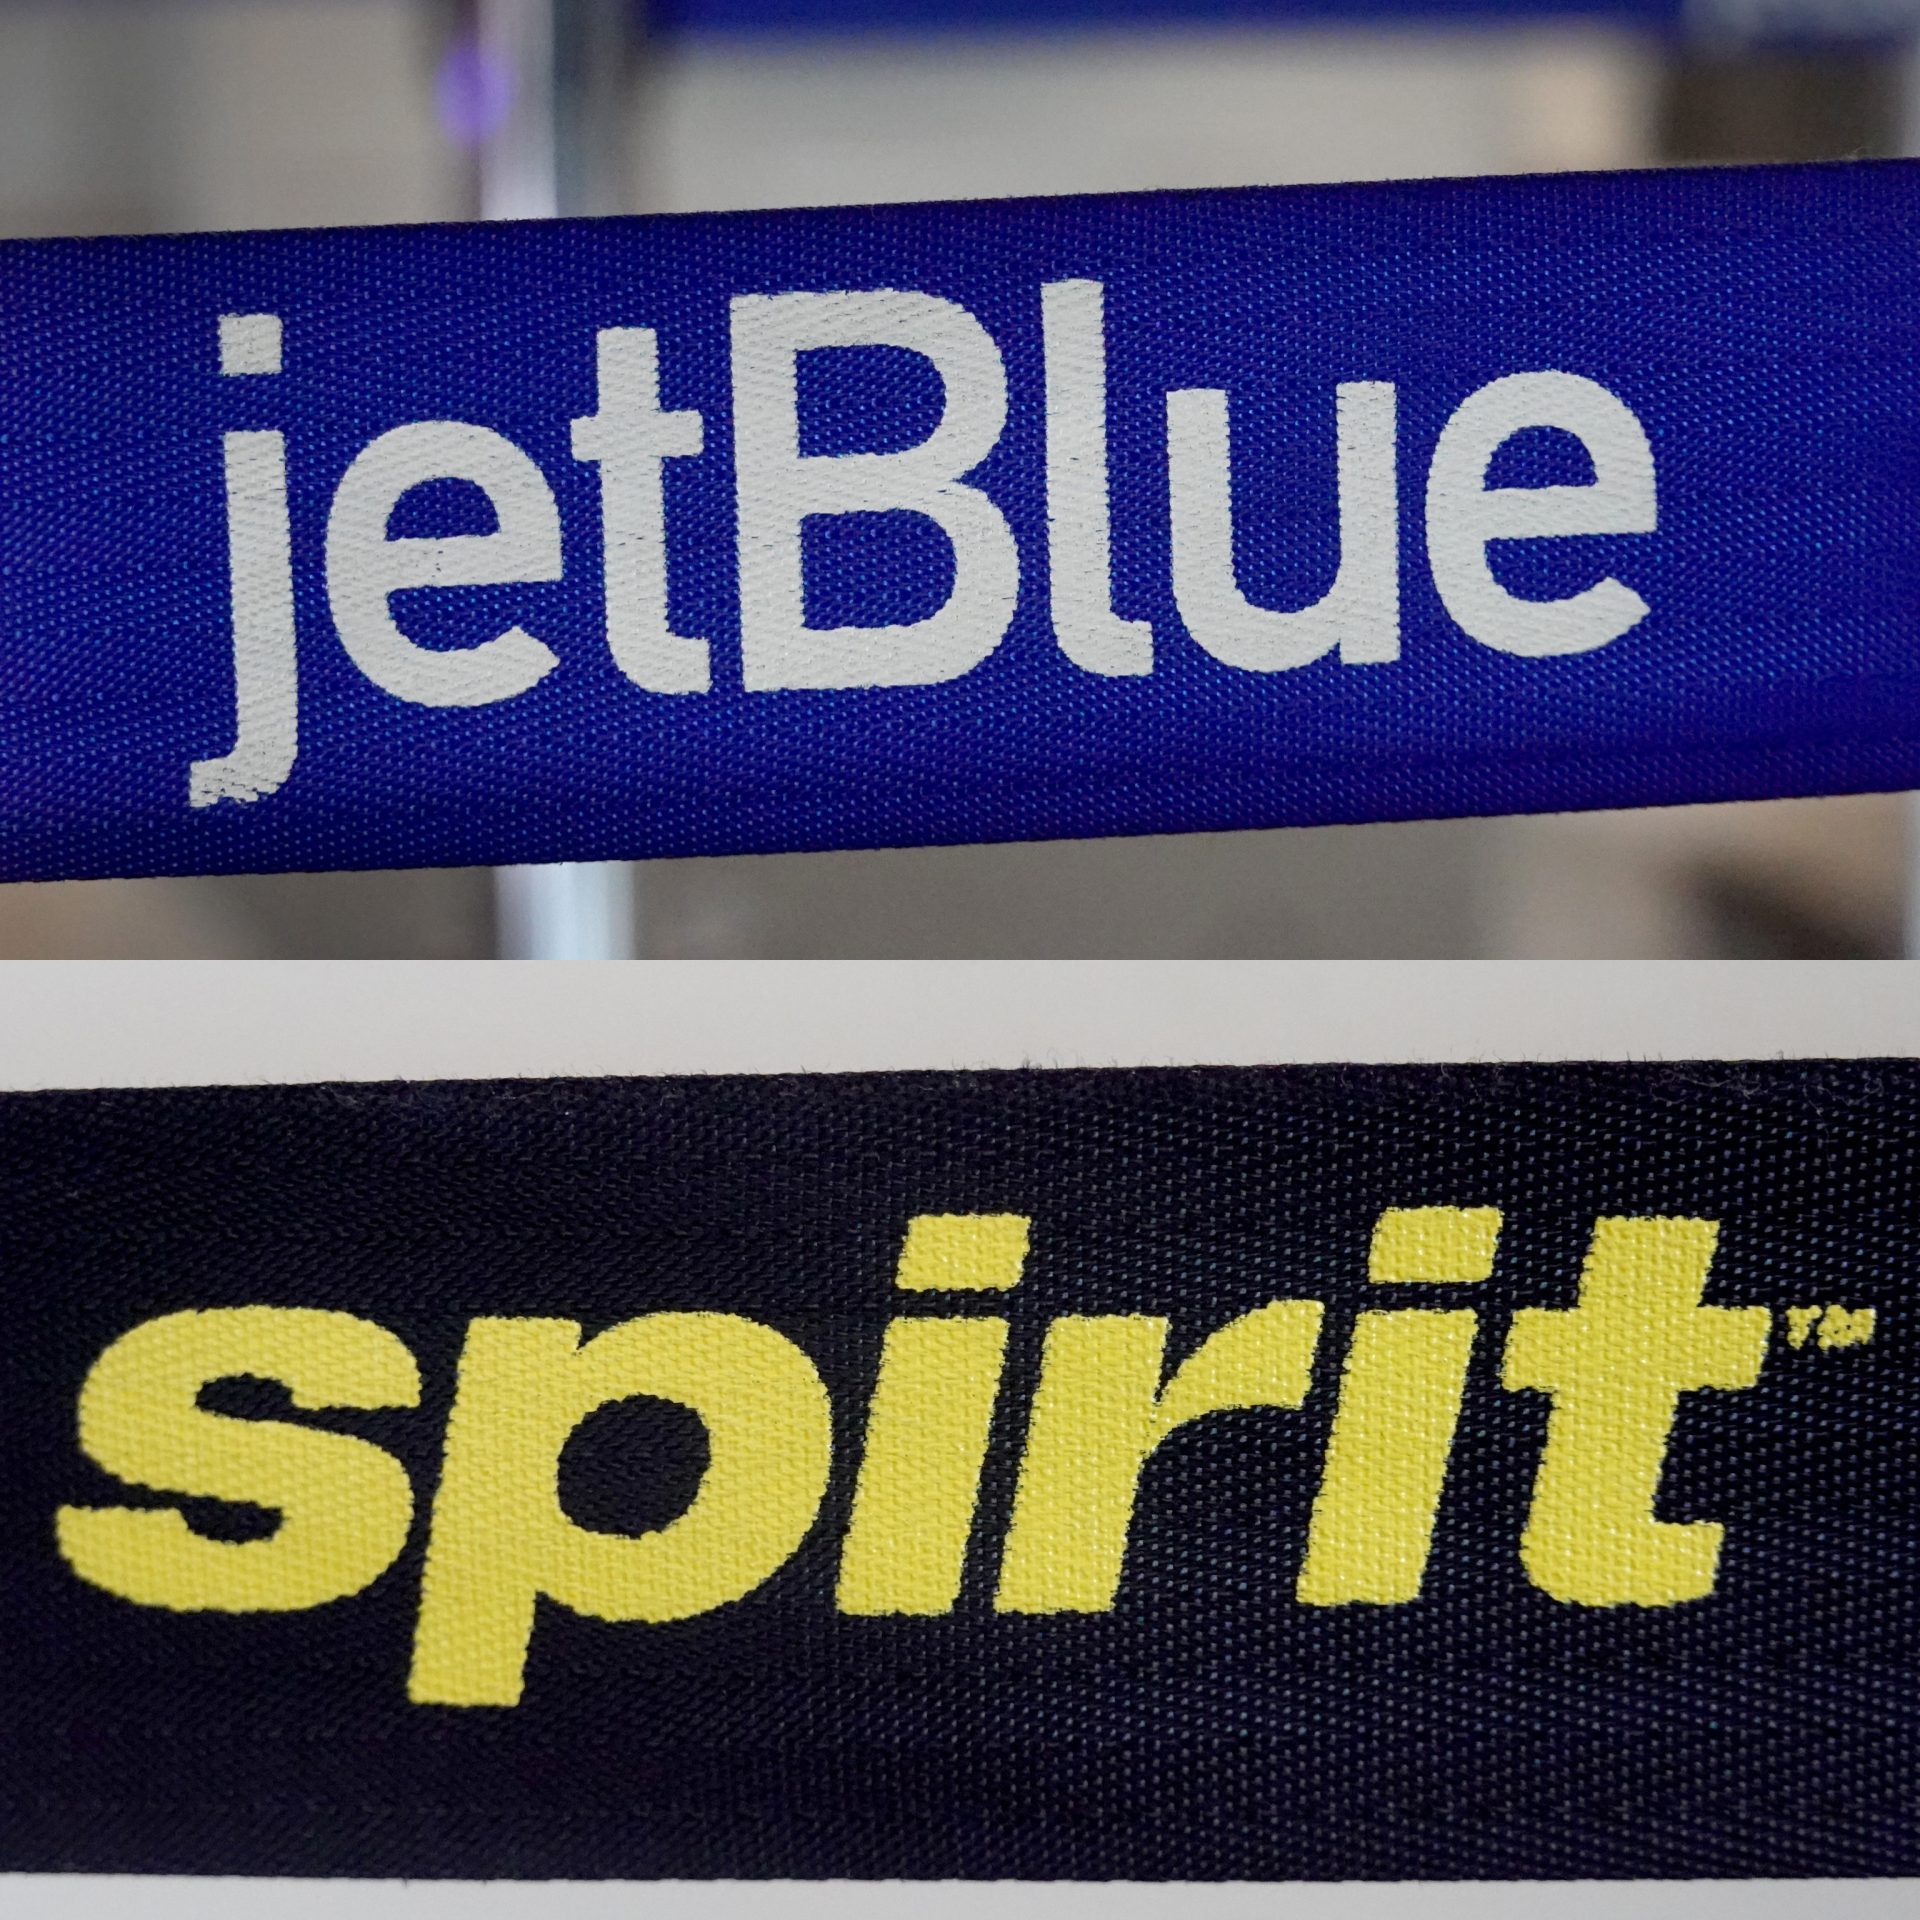 JetBlue Agrees To Purchase Spirit Airlines For $3.8 Billion After Months Of Negotiations (Update) thumbnail